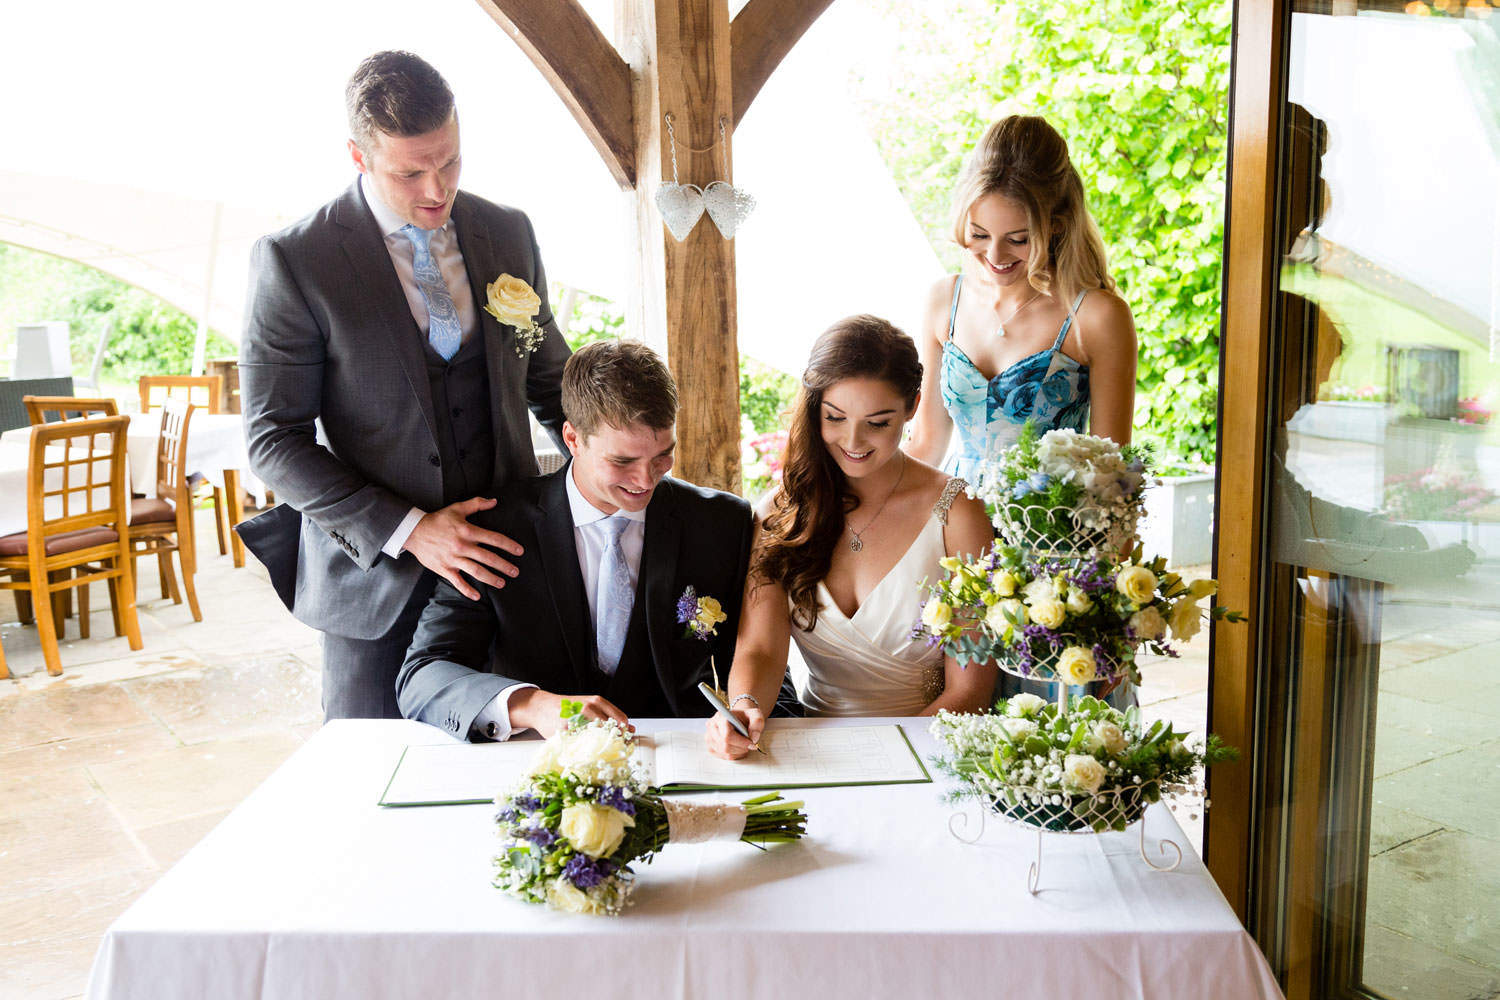 Signing of the wedding register